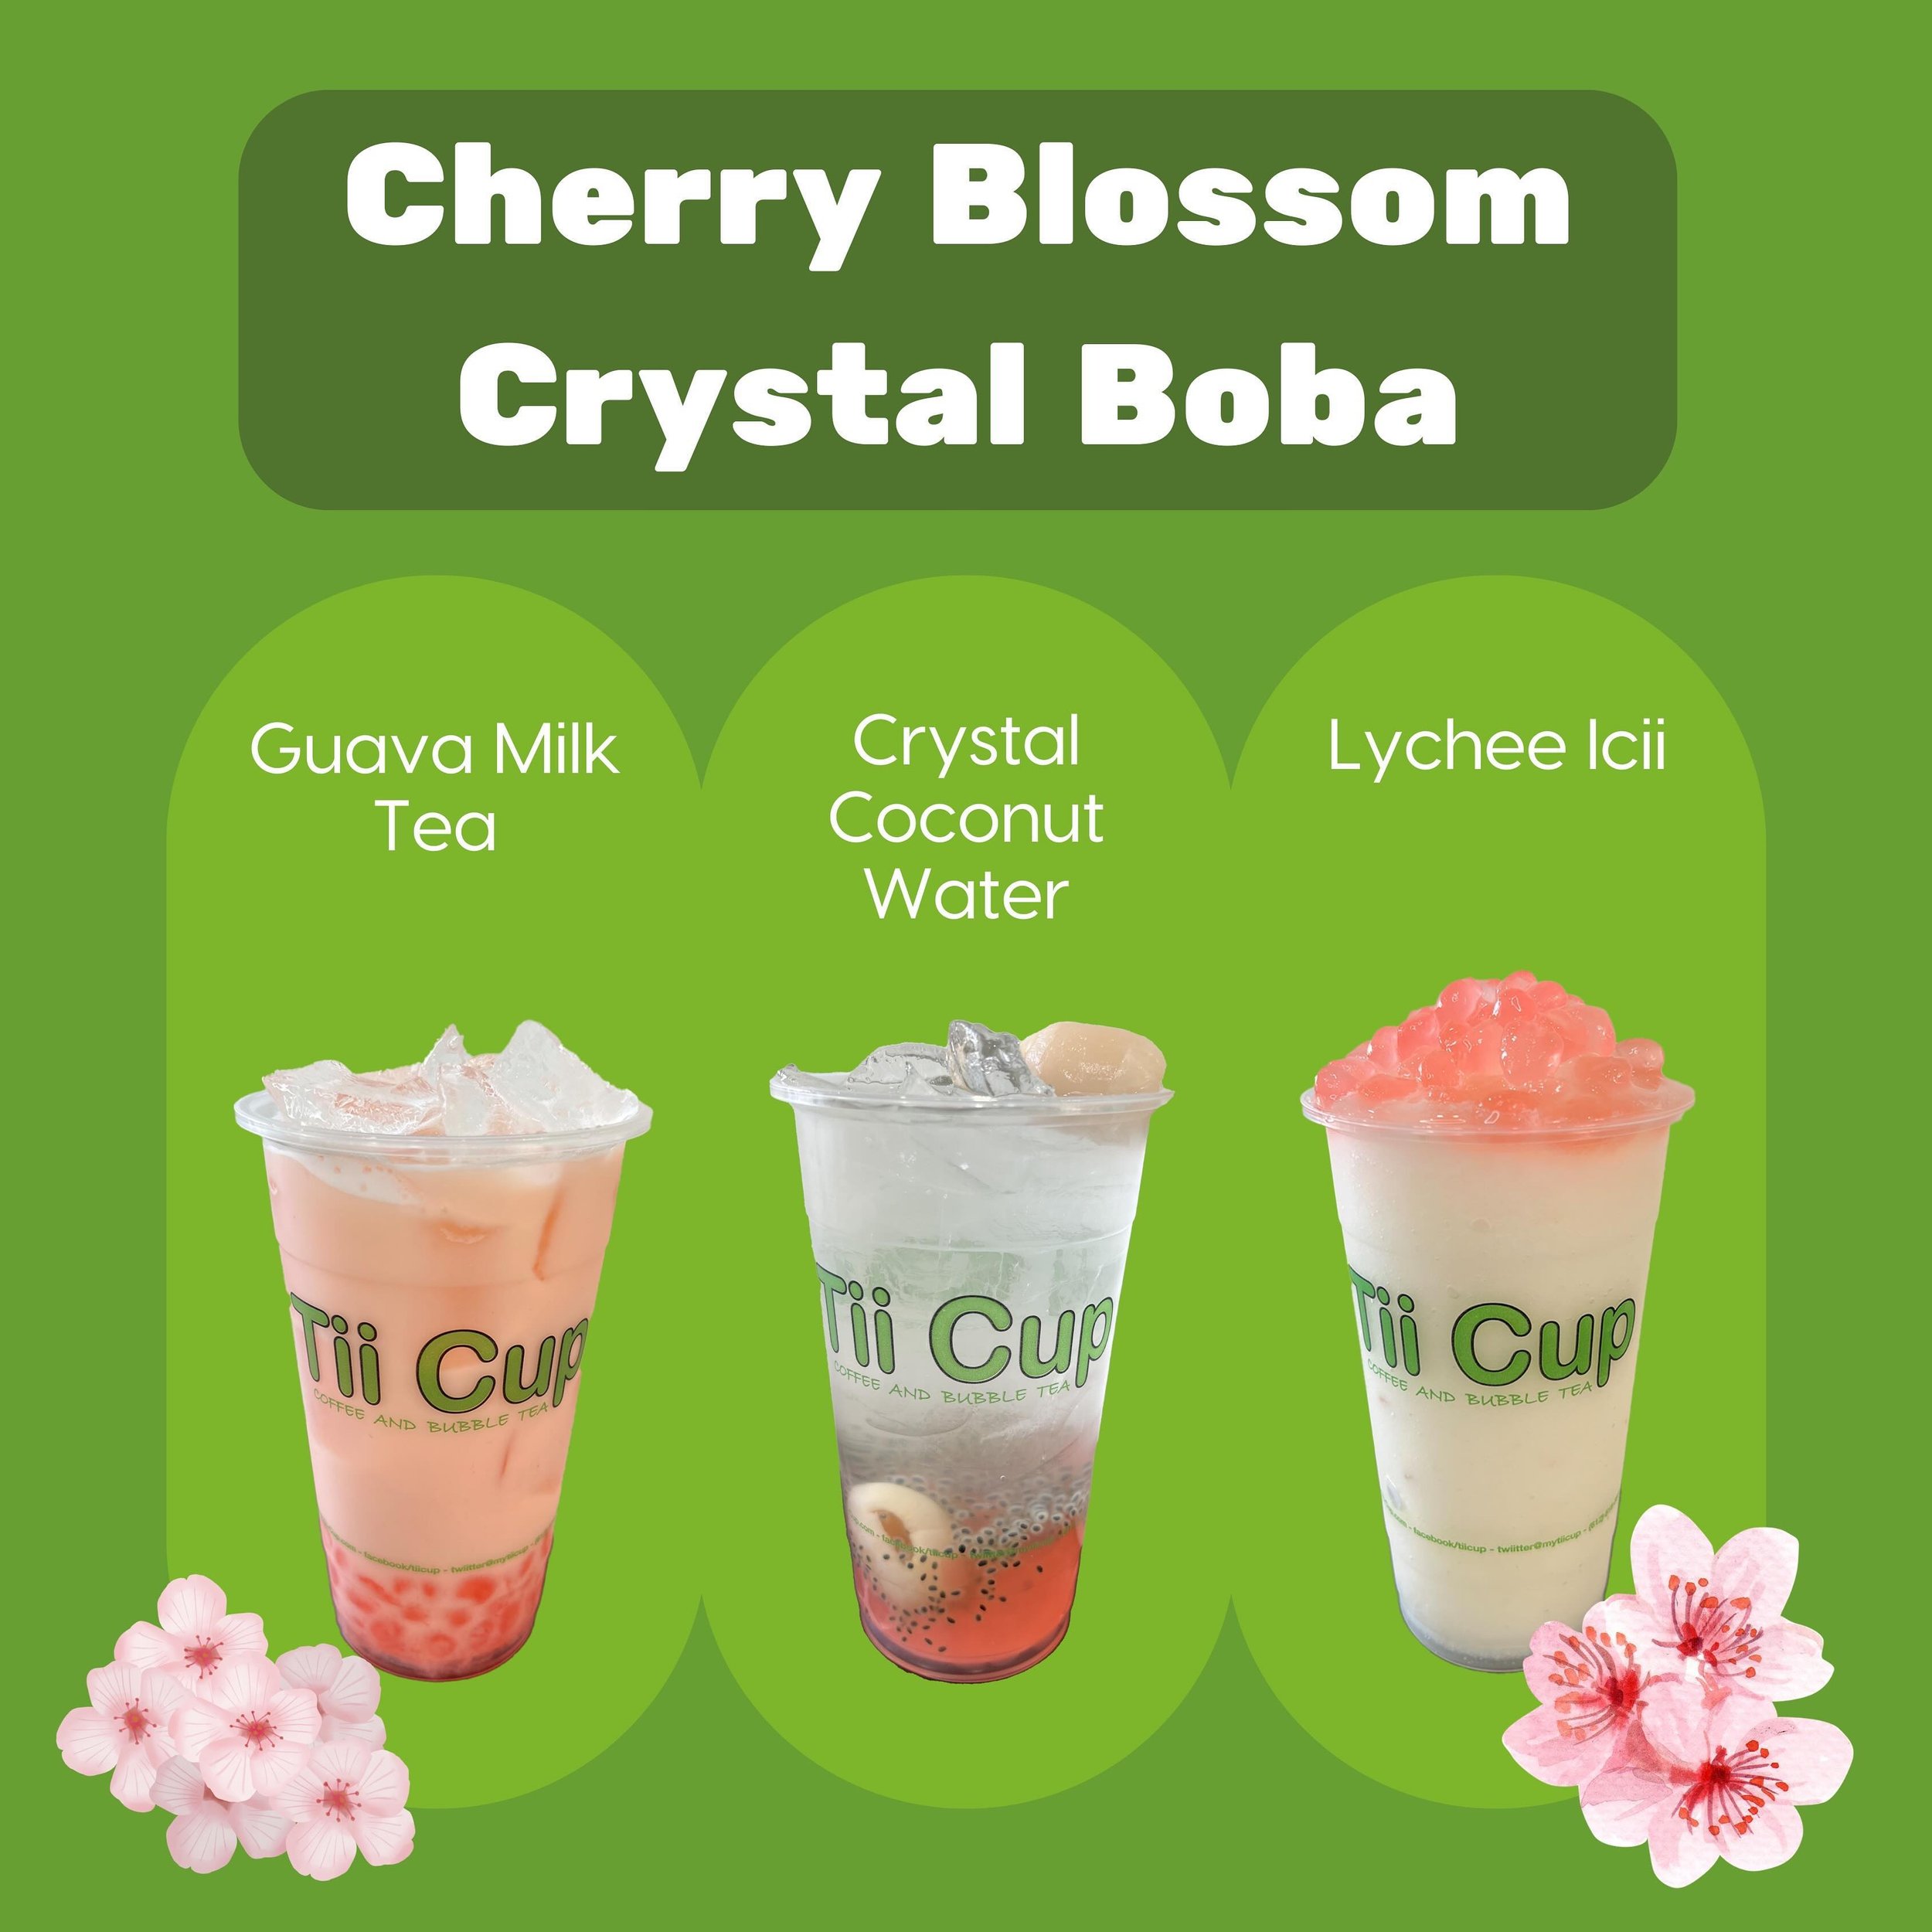 🌸🌸🌸 April showers bring May flowers! Have you tried our Cherry Blossom Crystal boba? Add it to any drink you like! 🌸🌸🌸

Available at all locations, while supplies last! 💚🧋